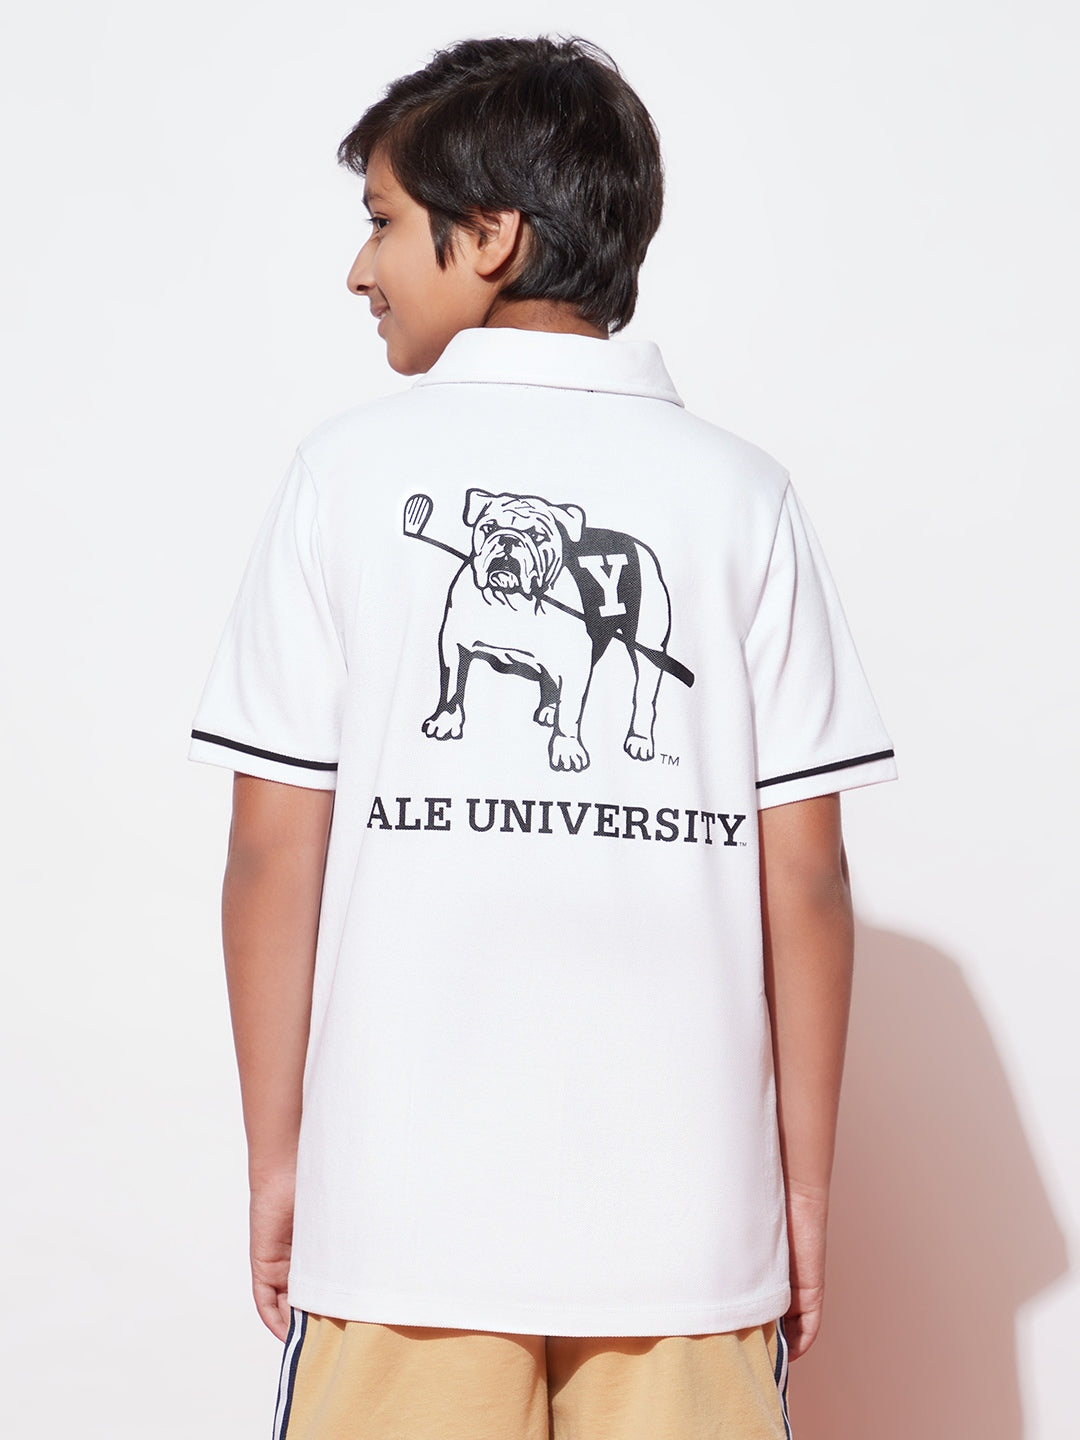 Teen Boys' White Polo Collared Yale T-Shirt and Beige Shorts Set